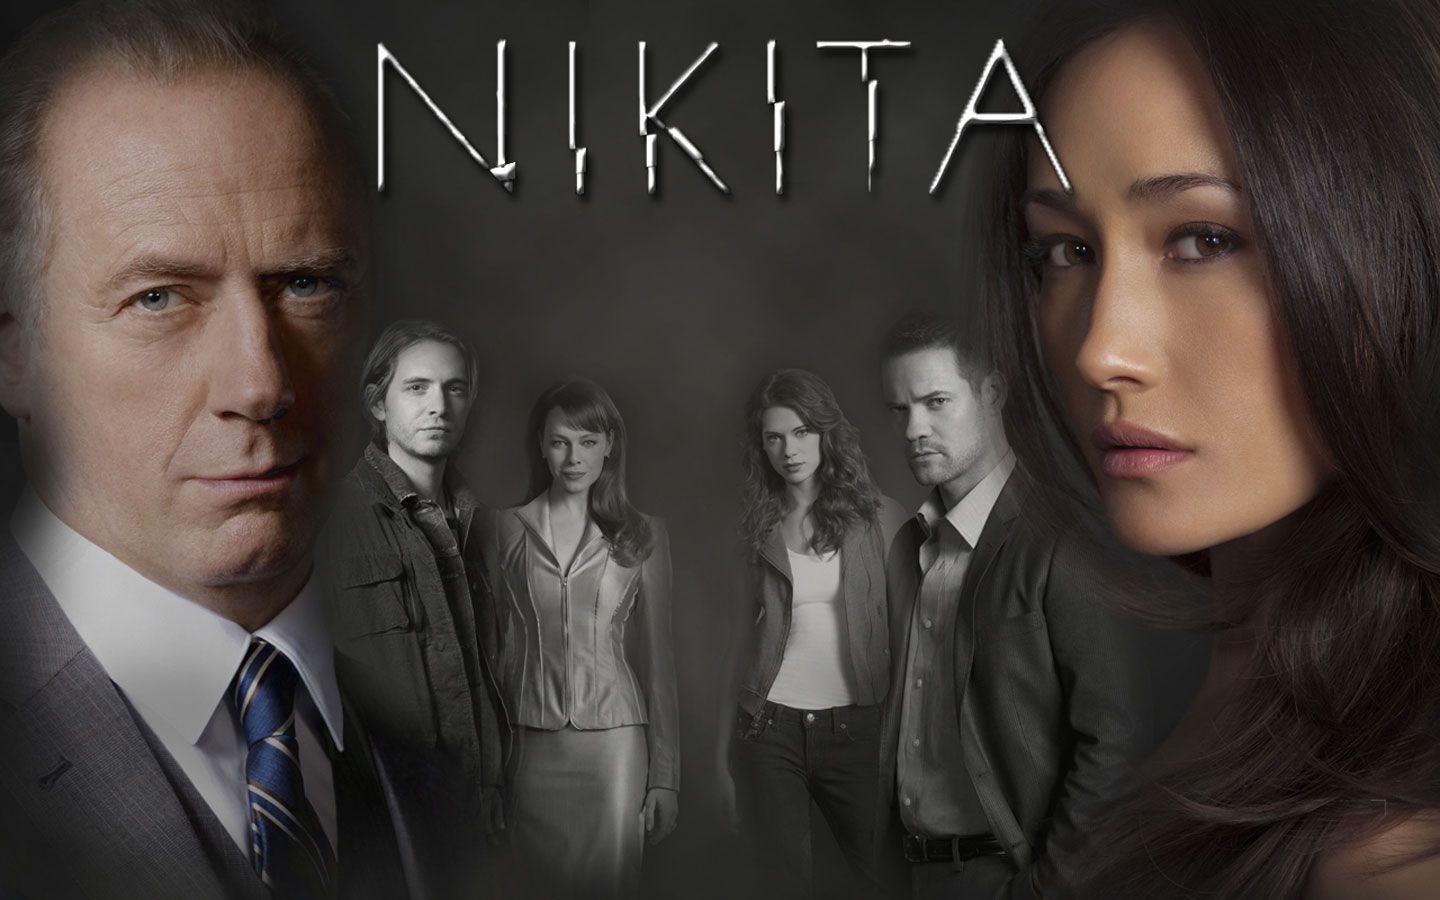 16 Nikita HD Wallpapers | Backgrounds - Wallpaper Abyss